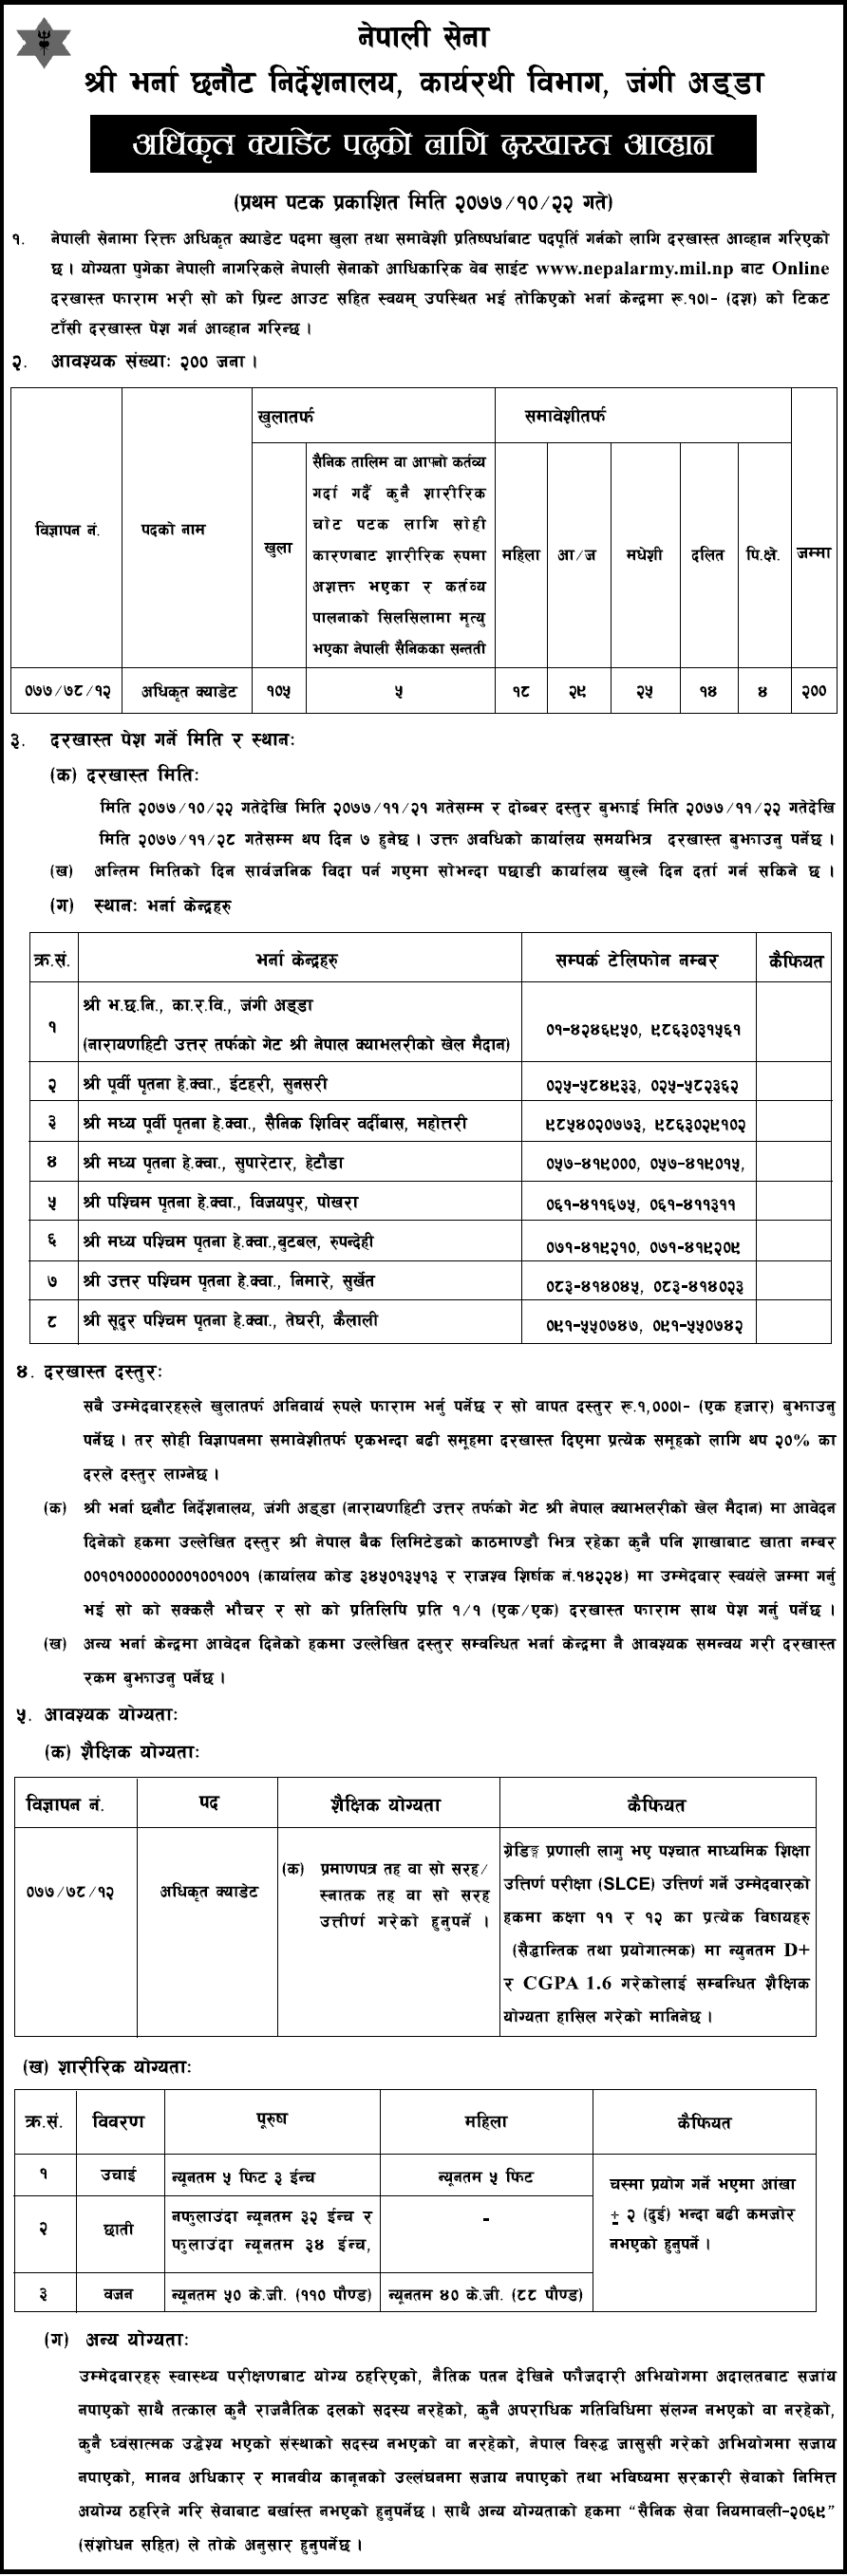 Nepal Army Vacancies for Officer Cadet - 2077